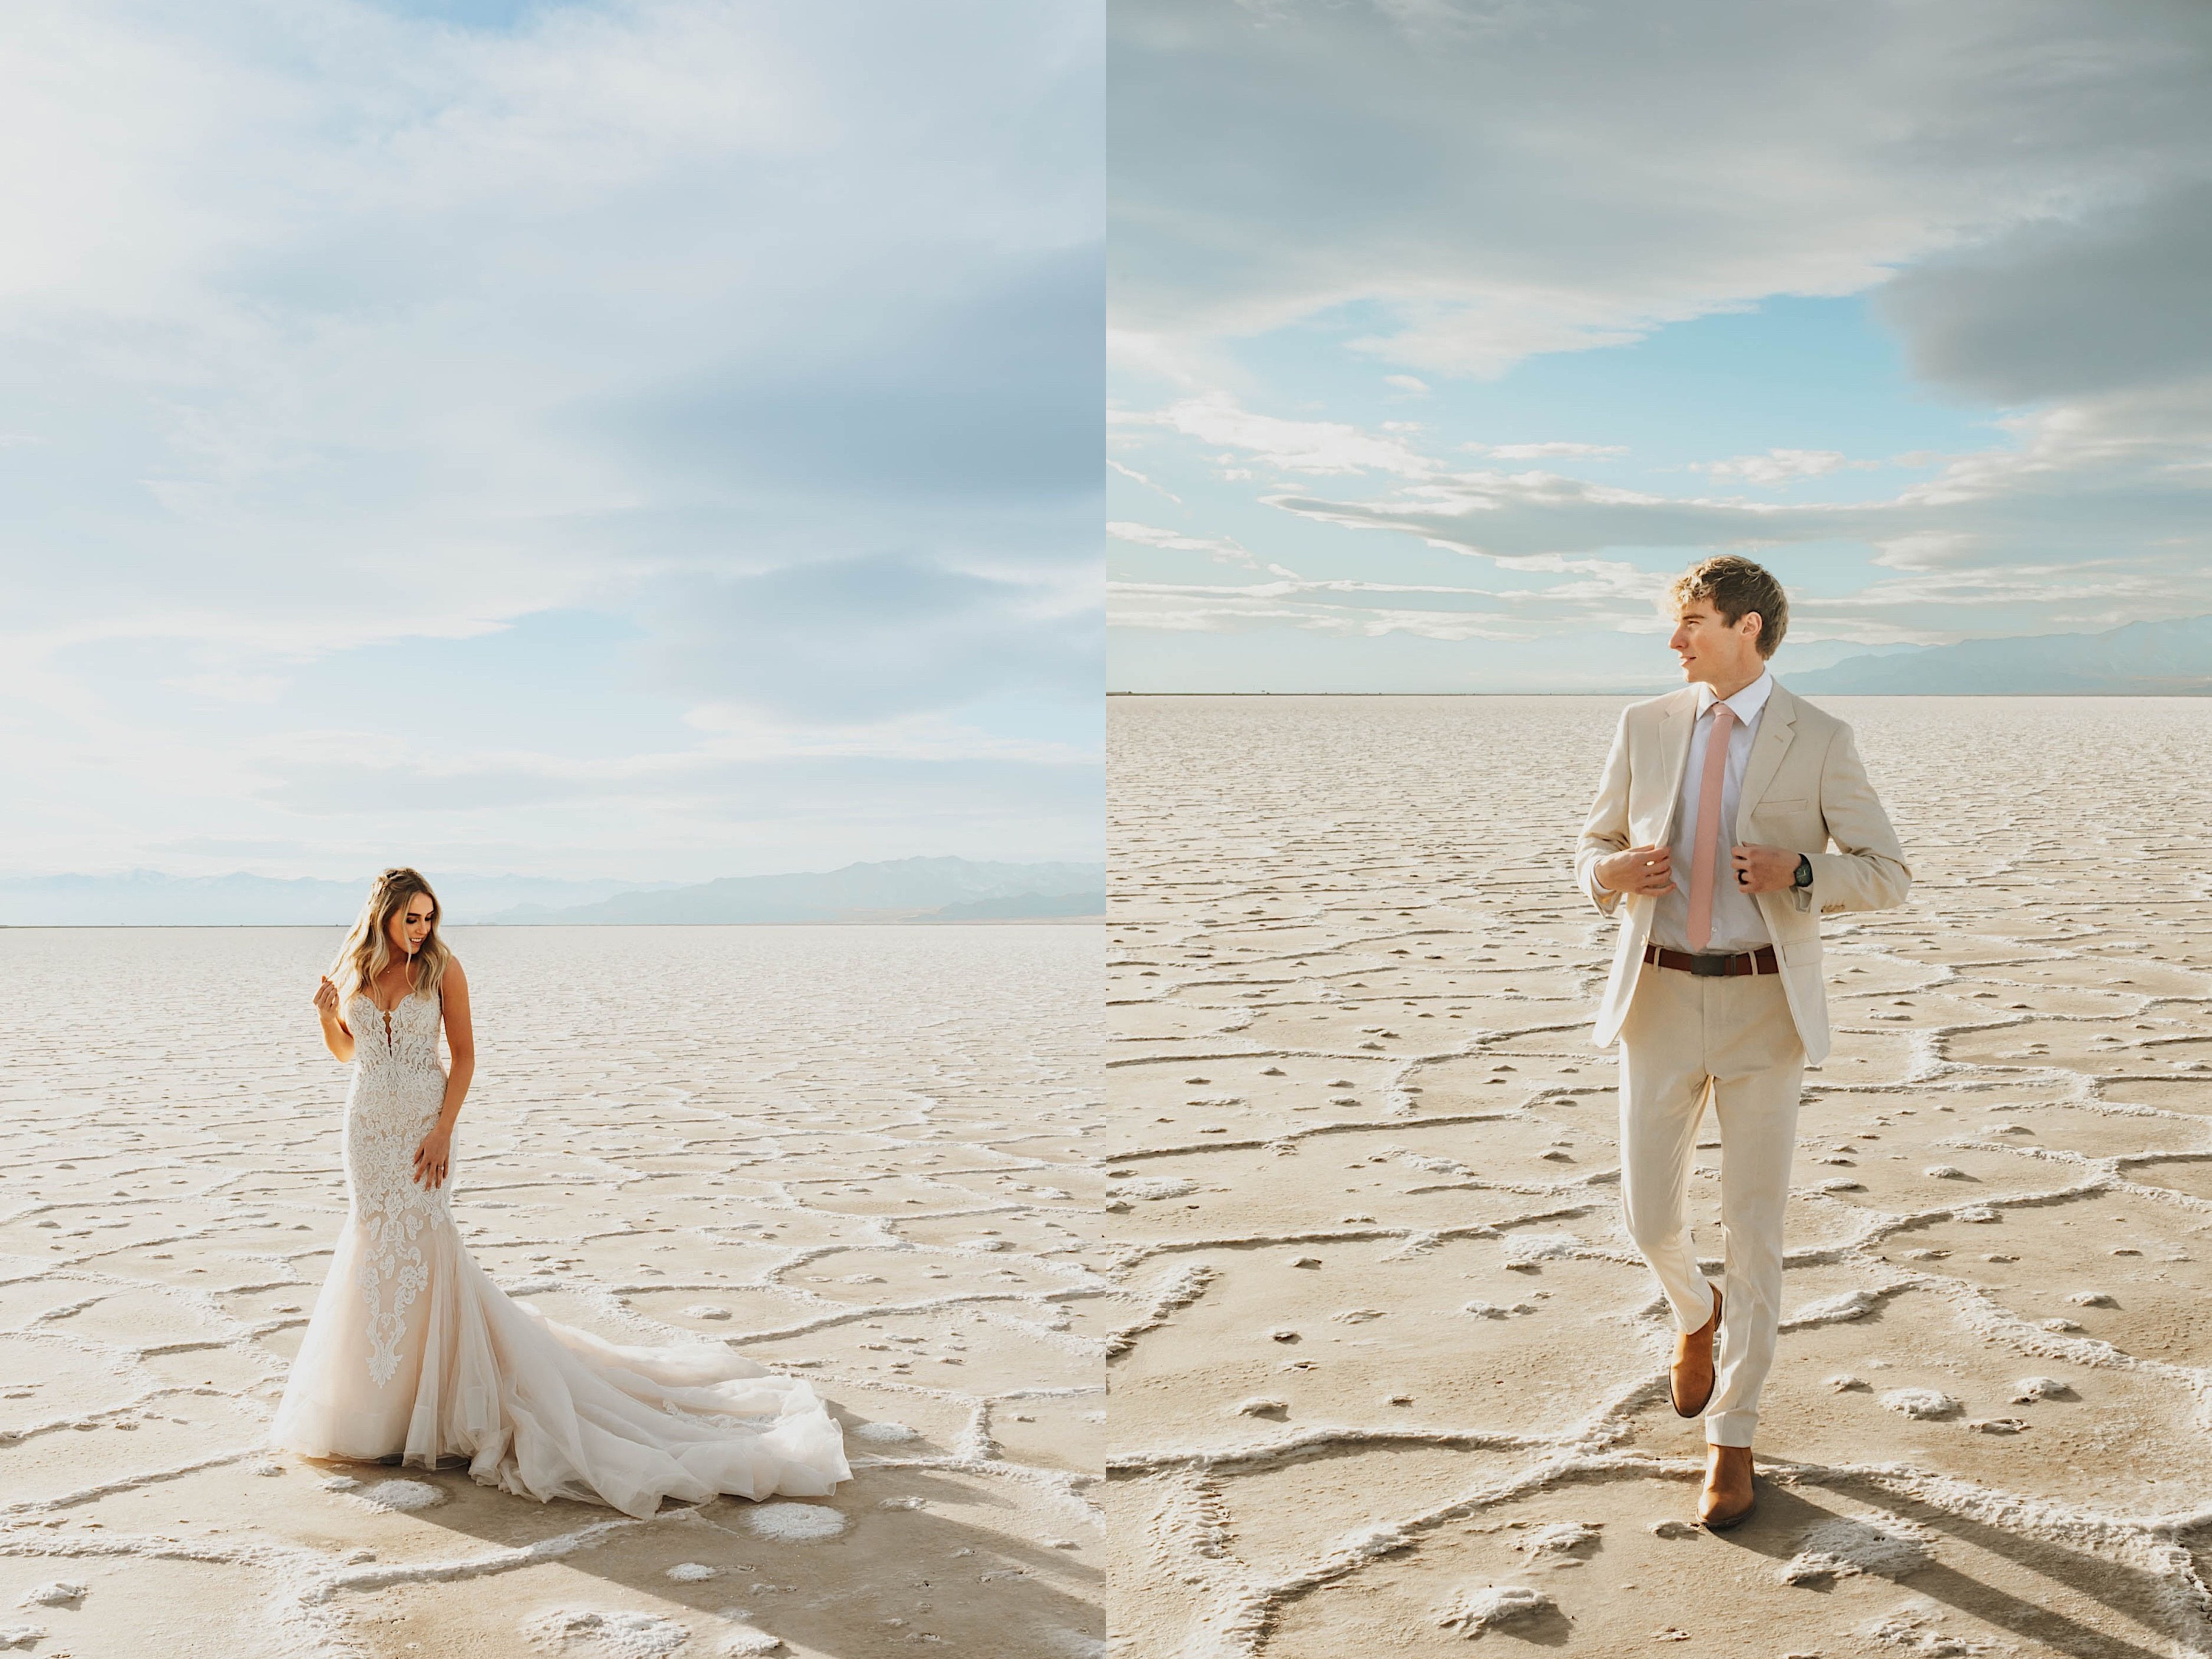 2 side by side photos, the left is a portrait photo of a bride looking at her dress, the right is of the groom walking and adjusting his coat, both are in the Utah Salt Flats